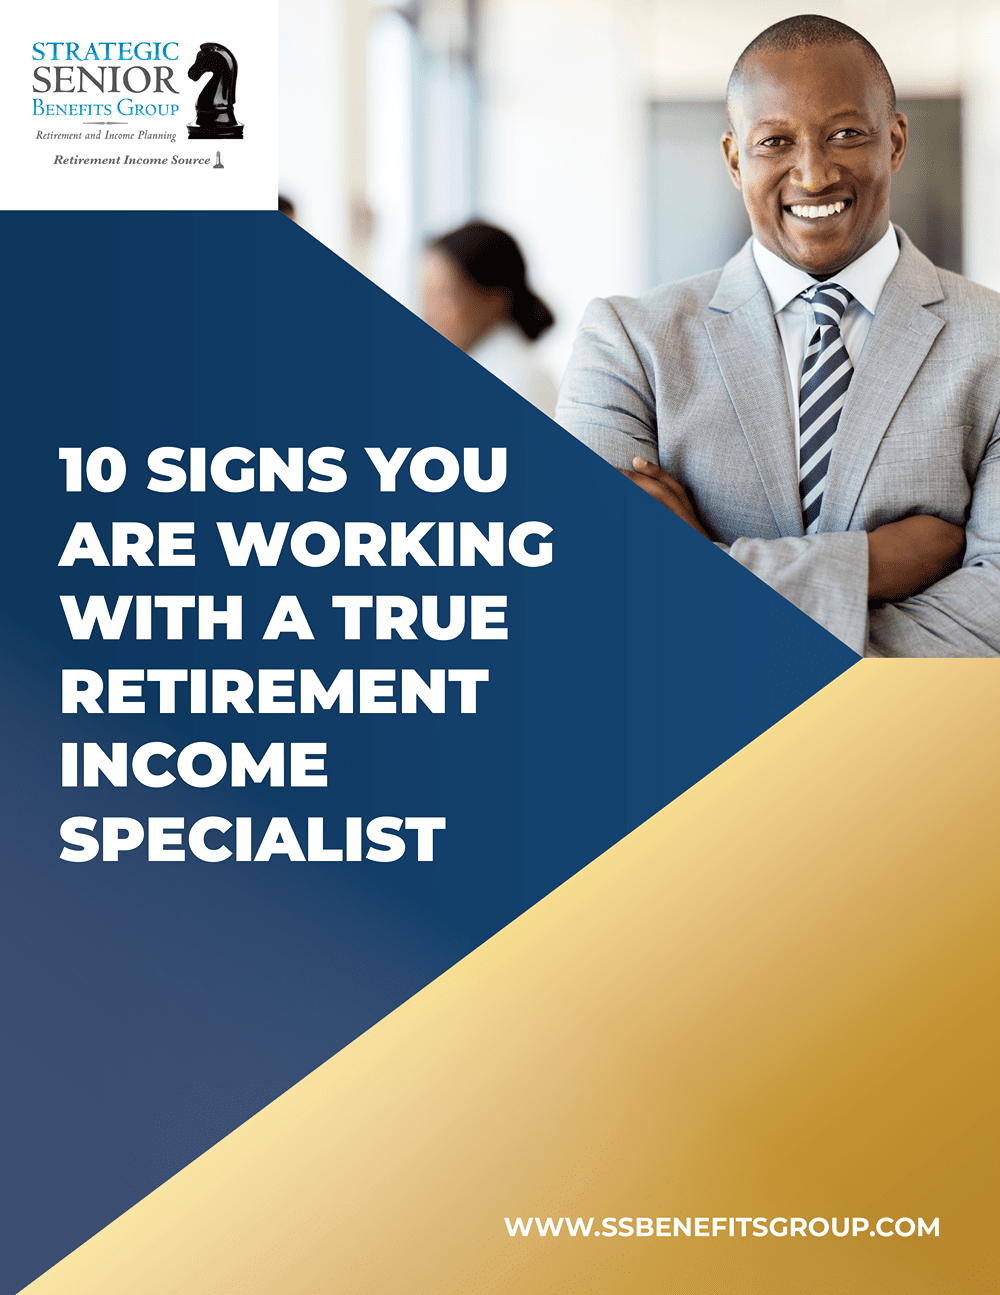 Strategic Senior Benefits Group - 10 Signs You Are Working with a True Retirement Income Specialist-1